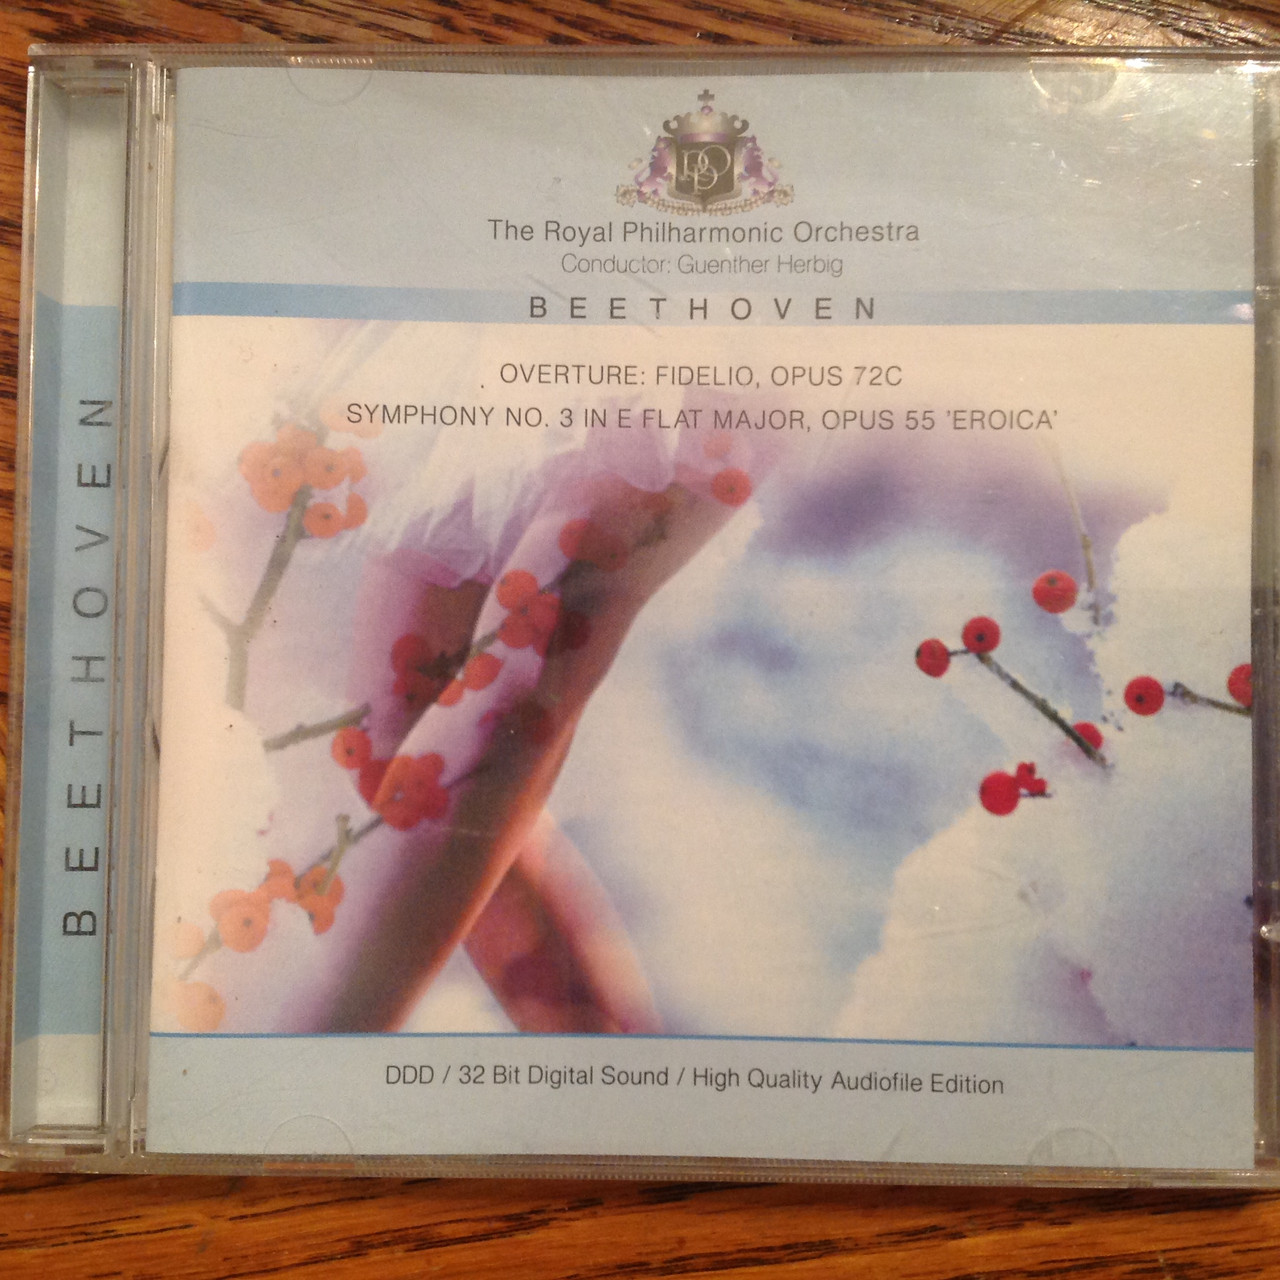 Beethoven by The Royal Philharmonic Orchestra CD